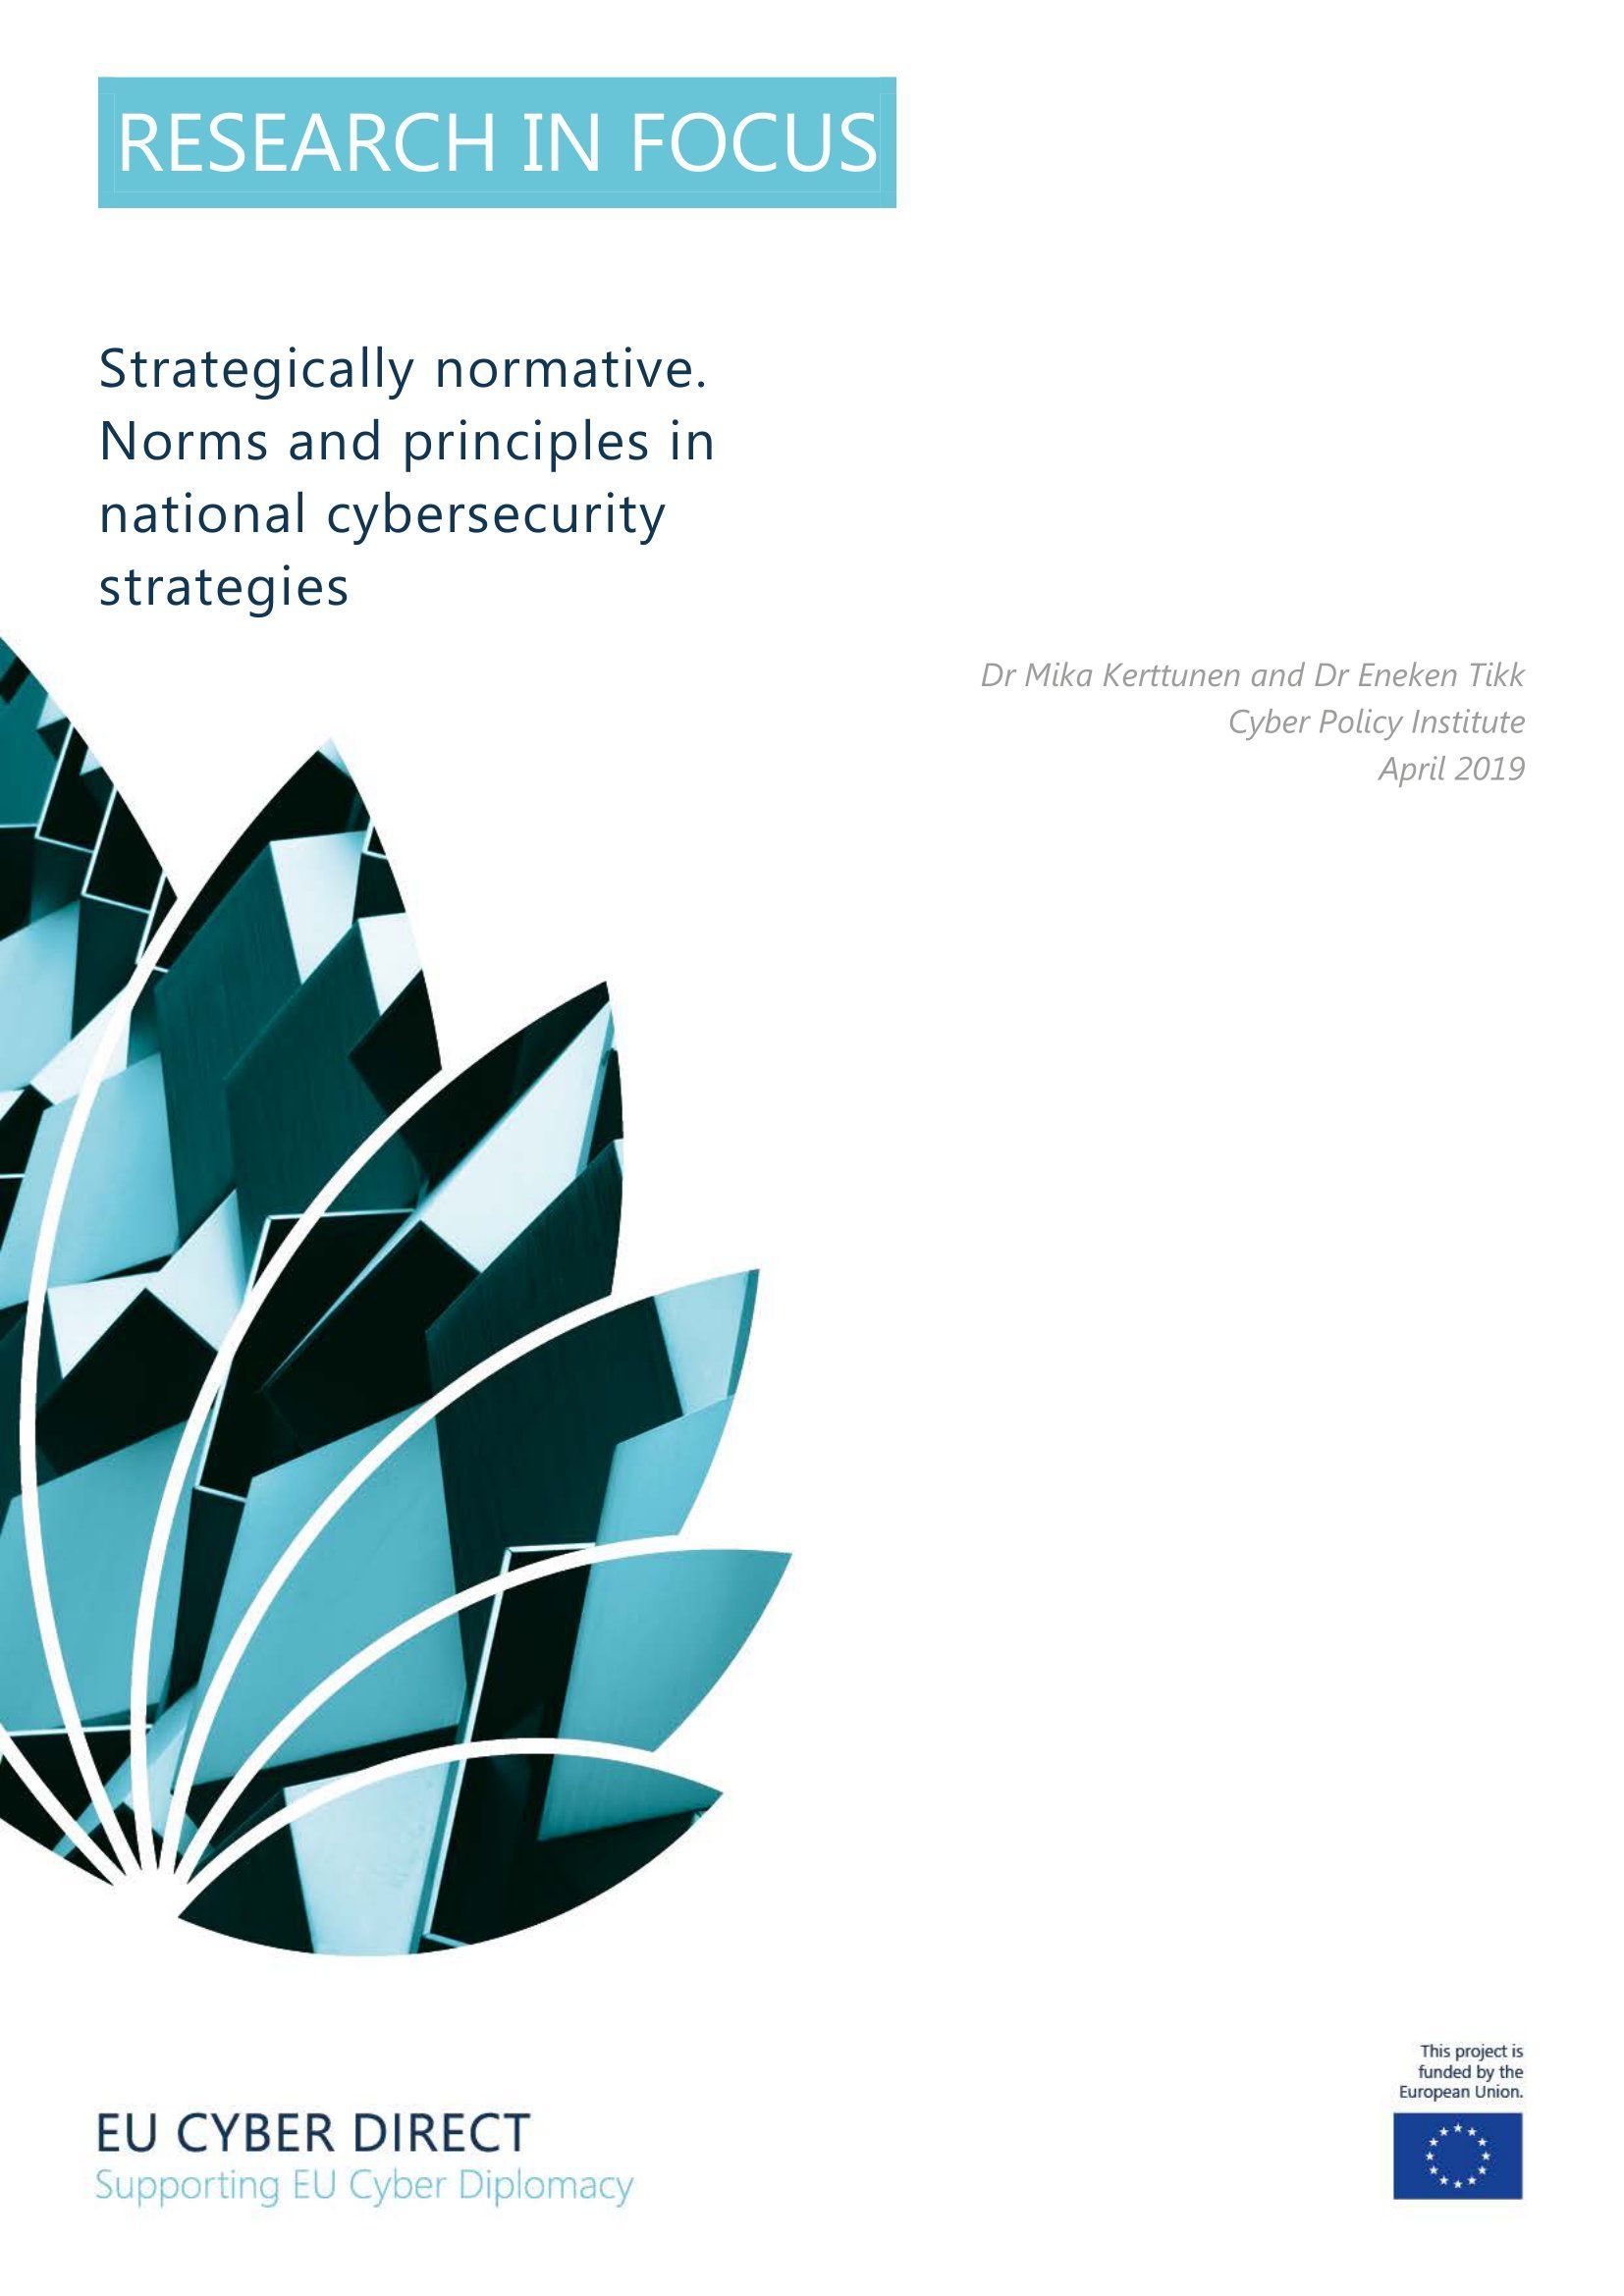 Strategically normative. Norms and principles in national cybersecurity strategies